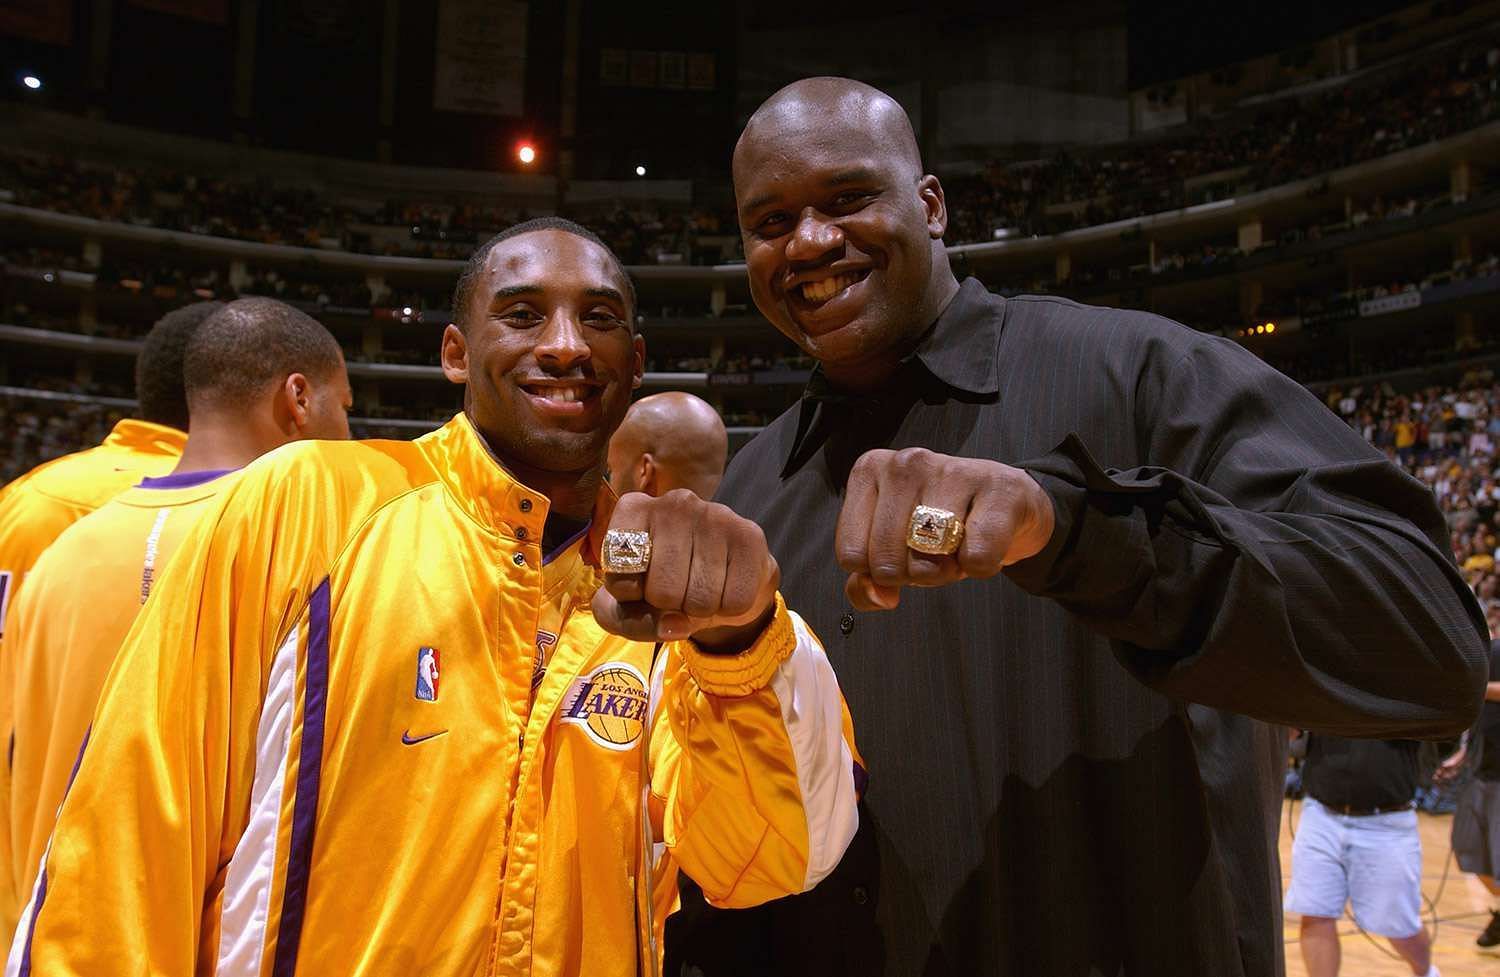 LA Lakers legends Kobe Bryant and Shaquille O